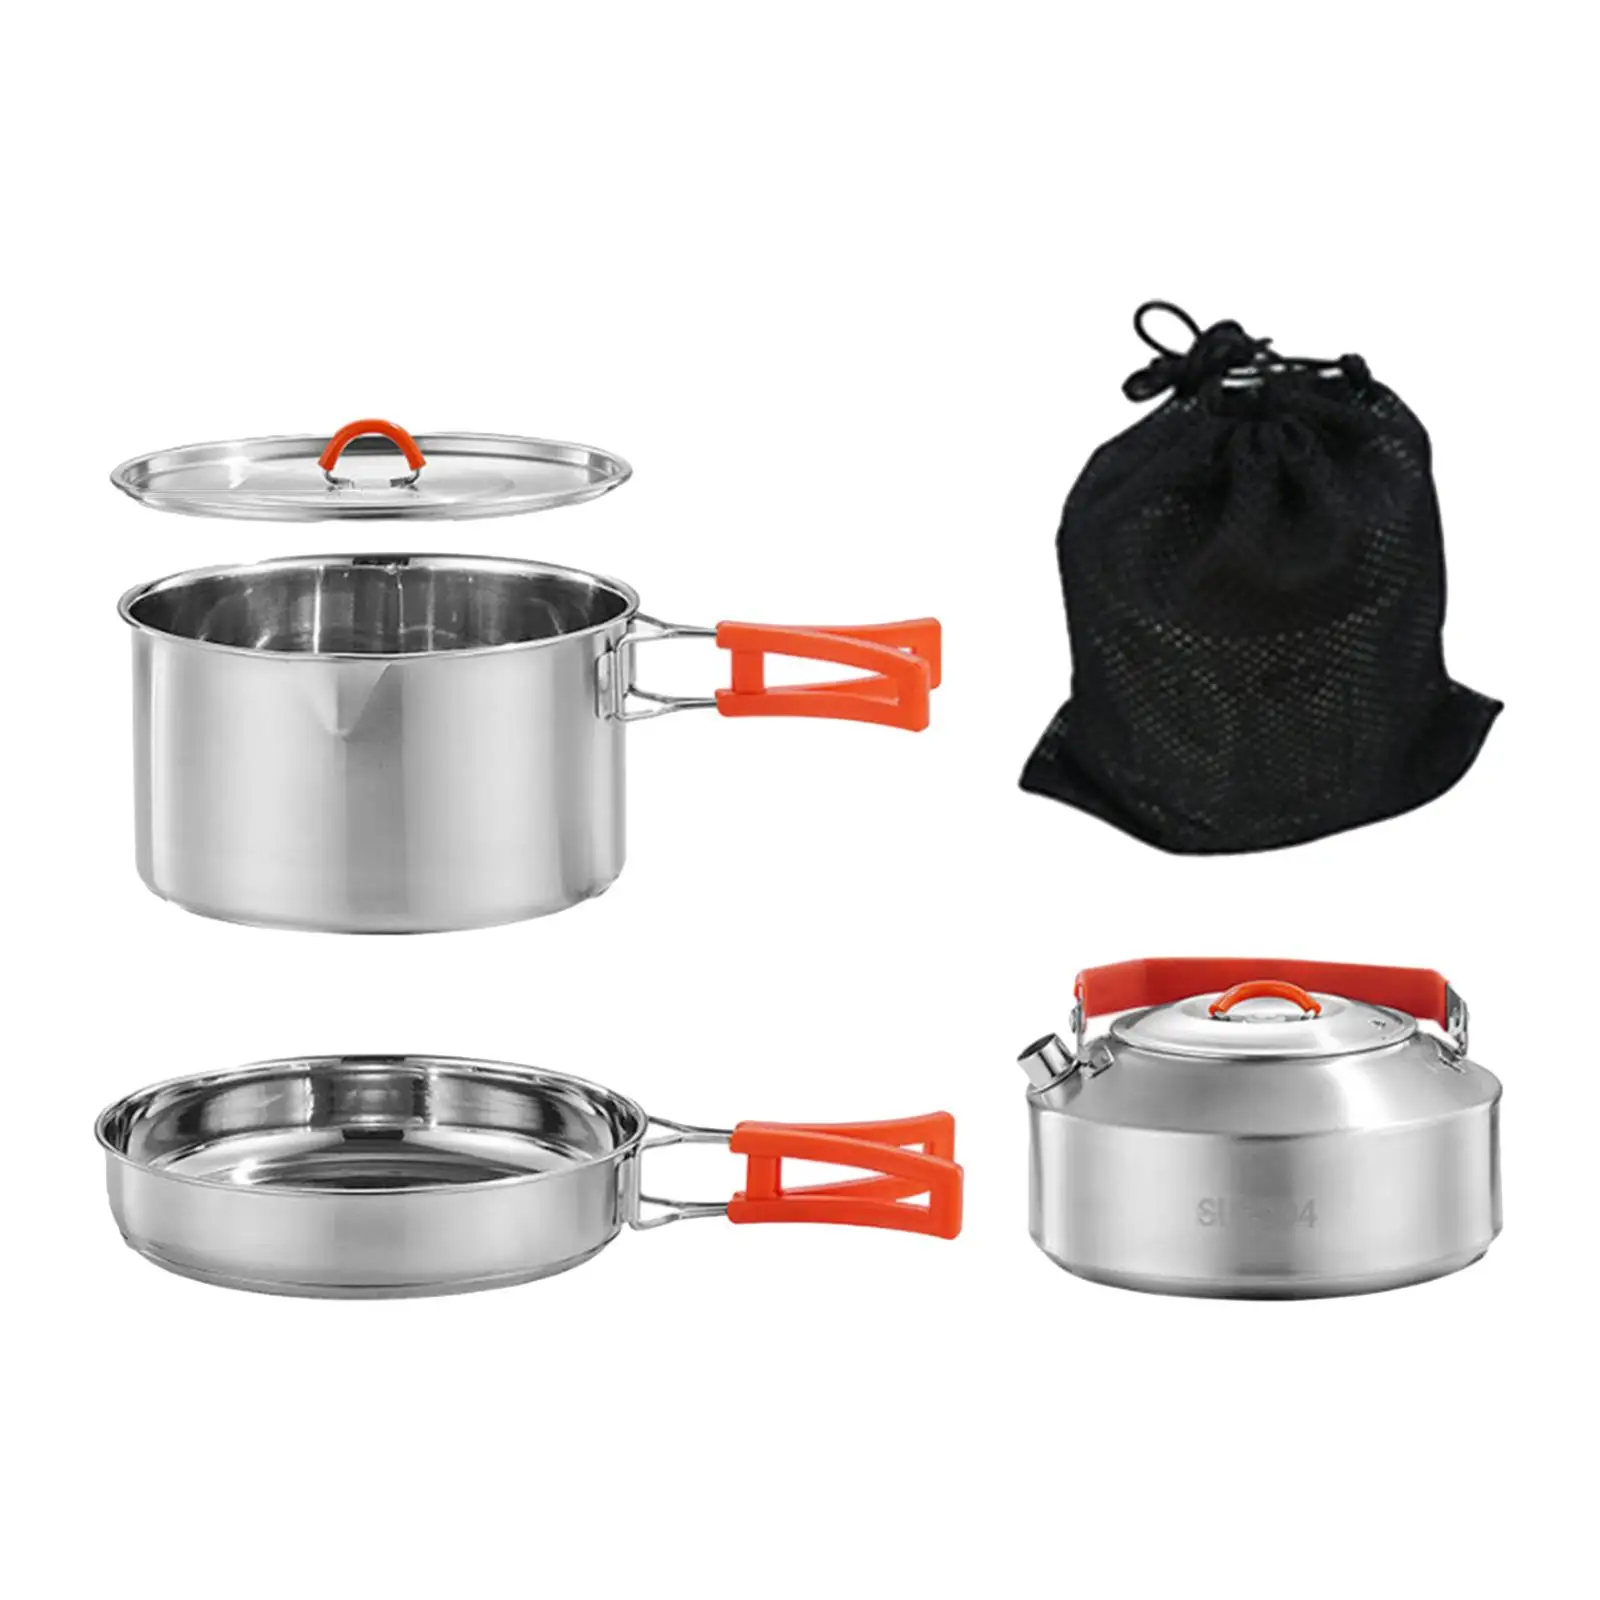 Camping Cookware Stainless Steel Camping Cooking Set Camping Pot and Pan Set for